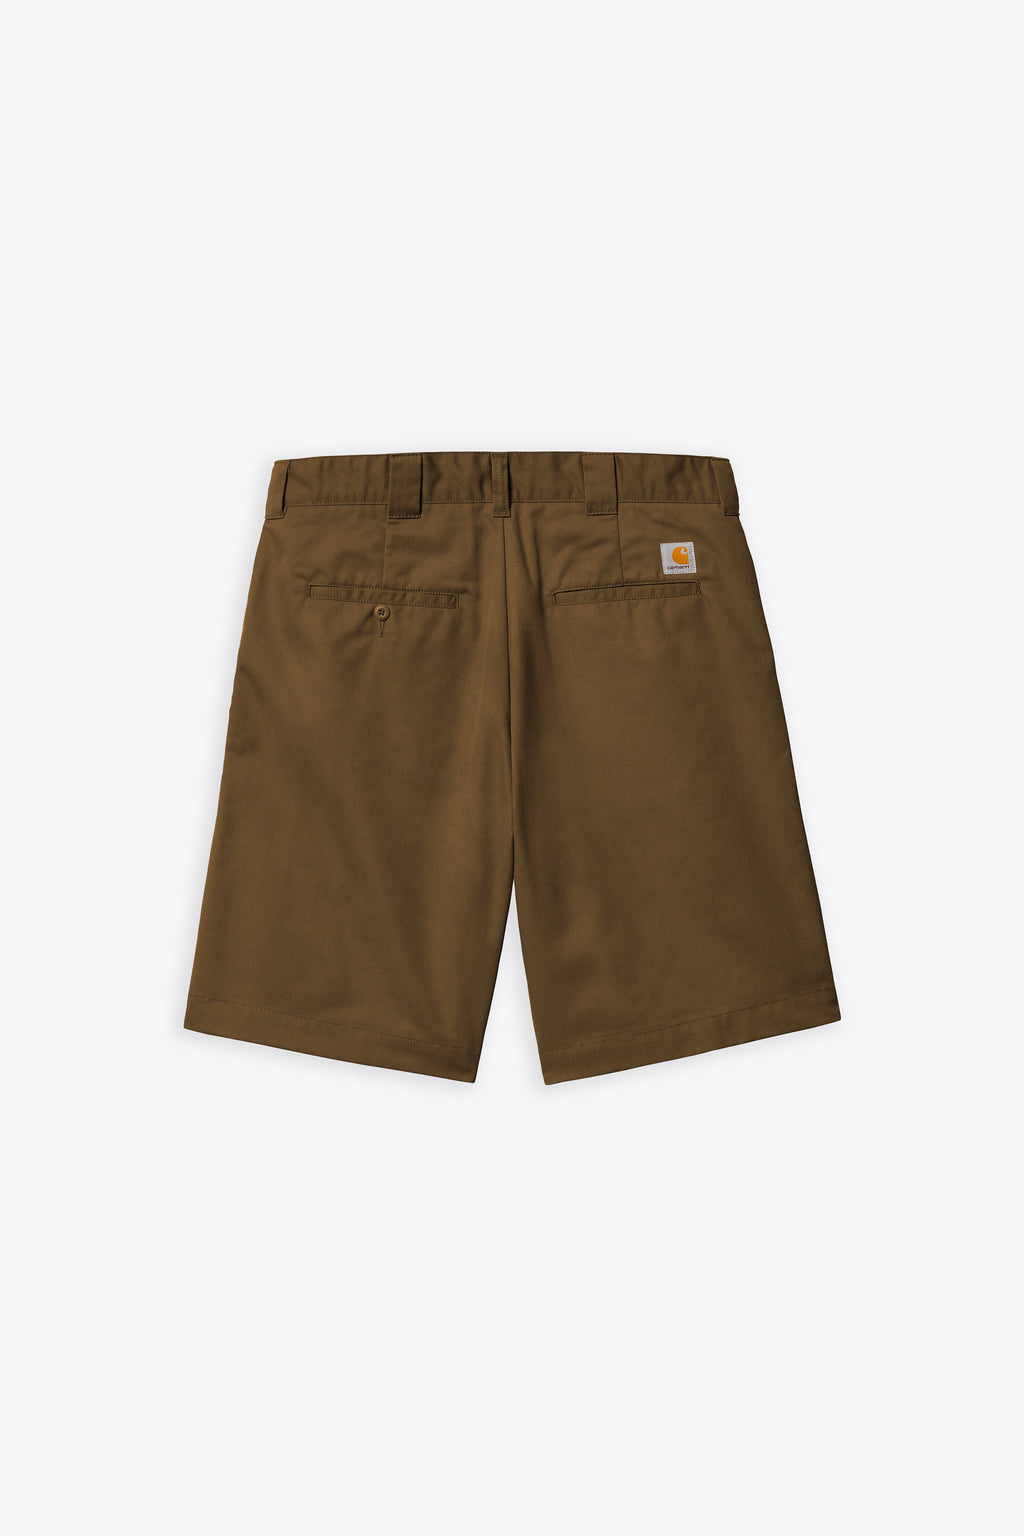 alt-image__Brown-cotton-twill-relaxed-fit-short---Craft-Short